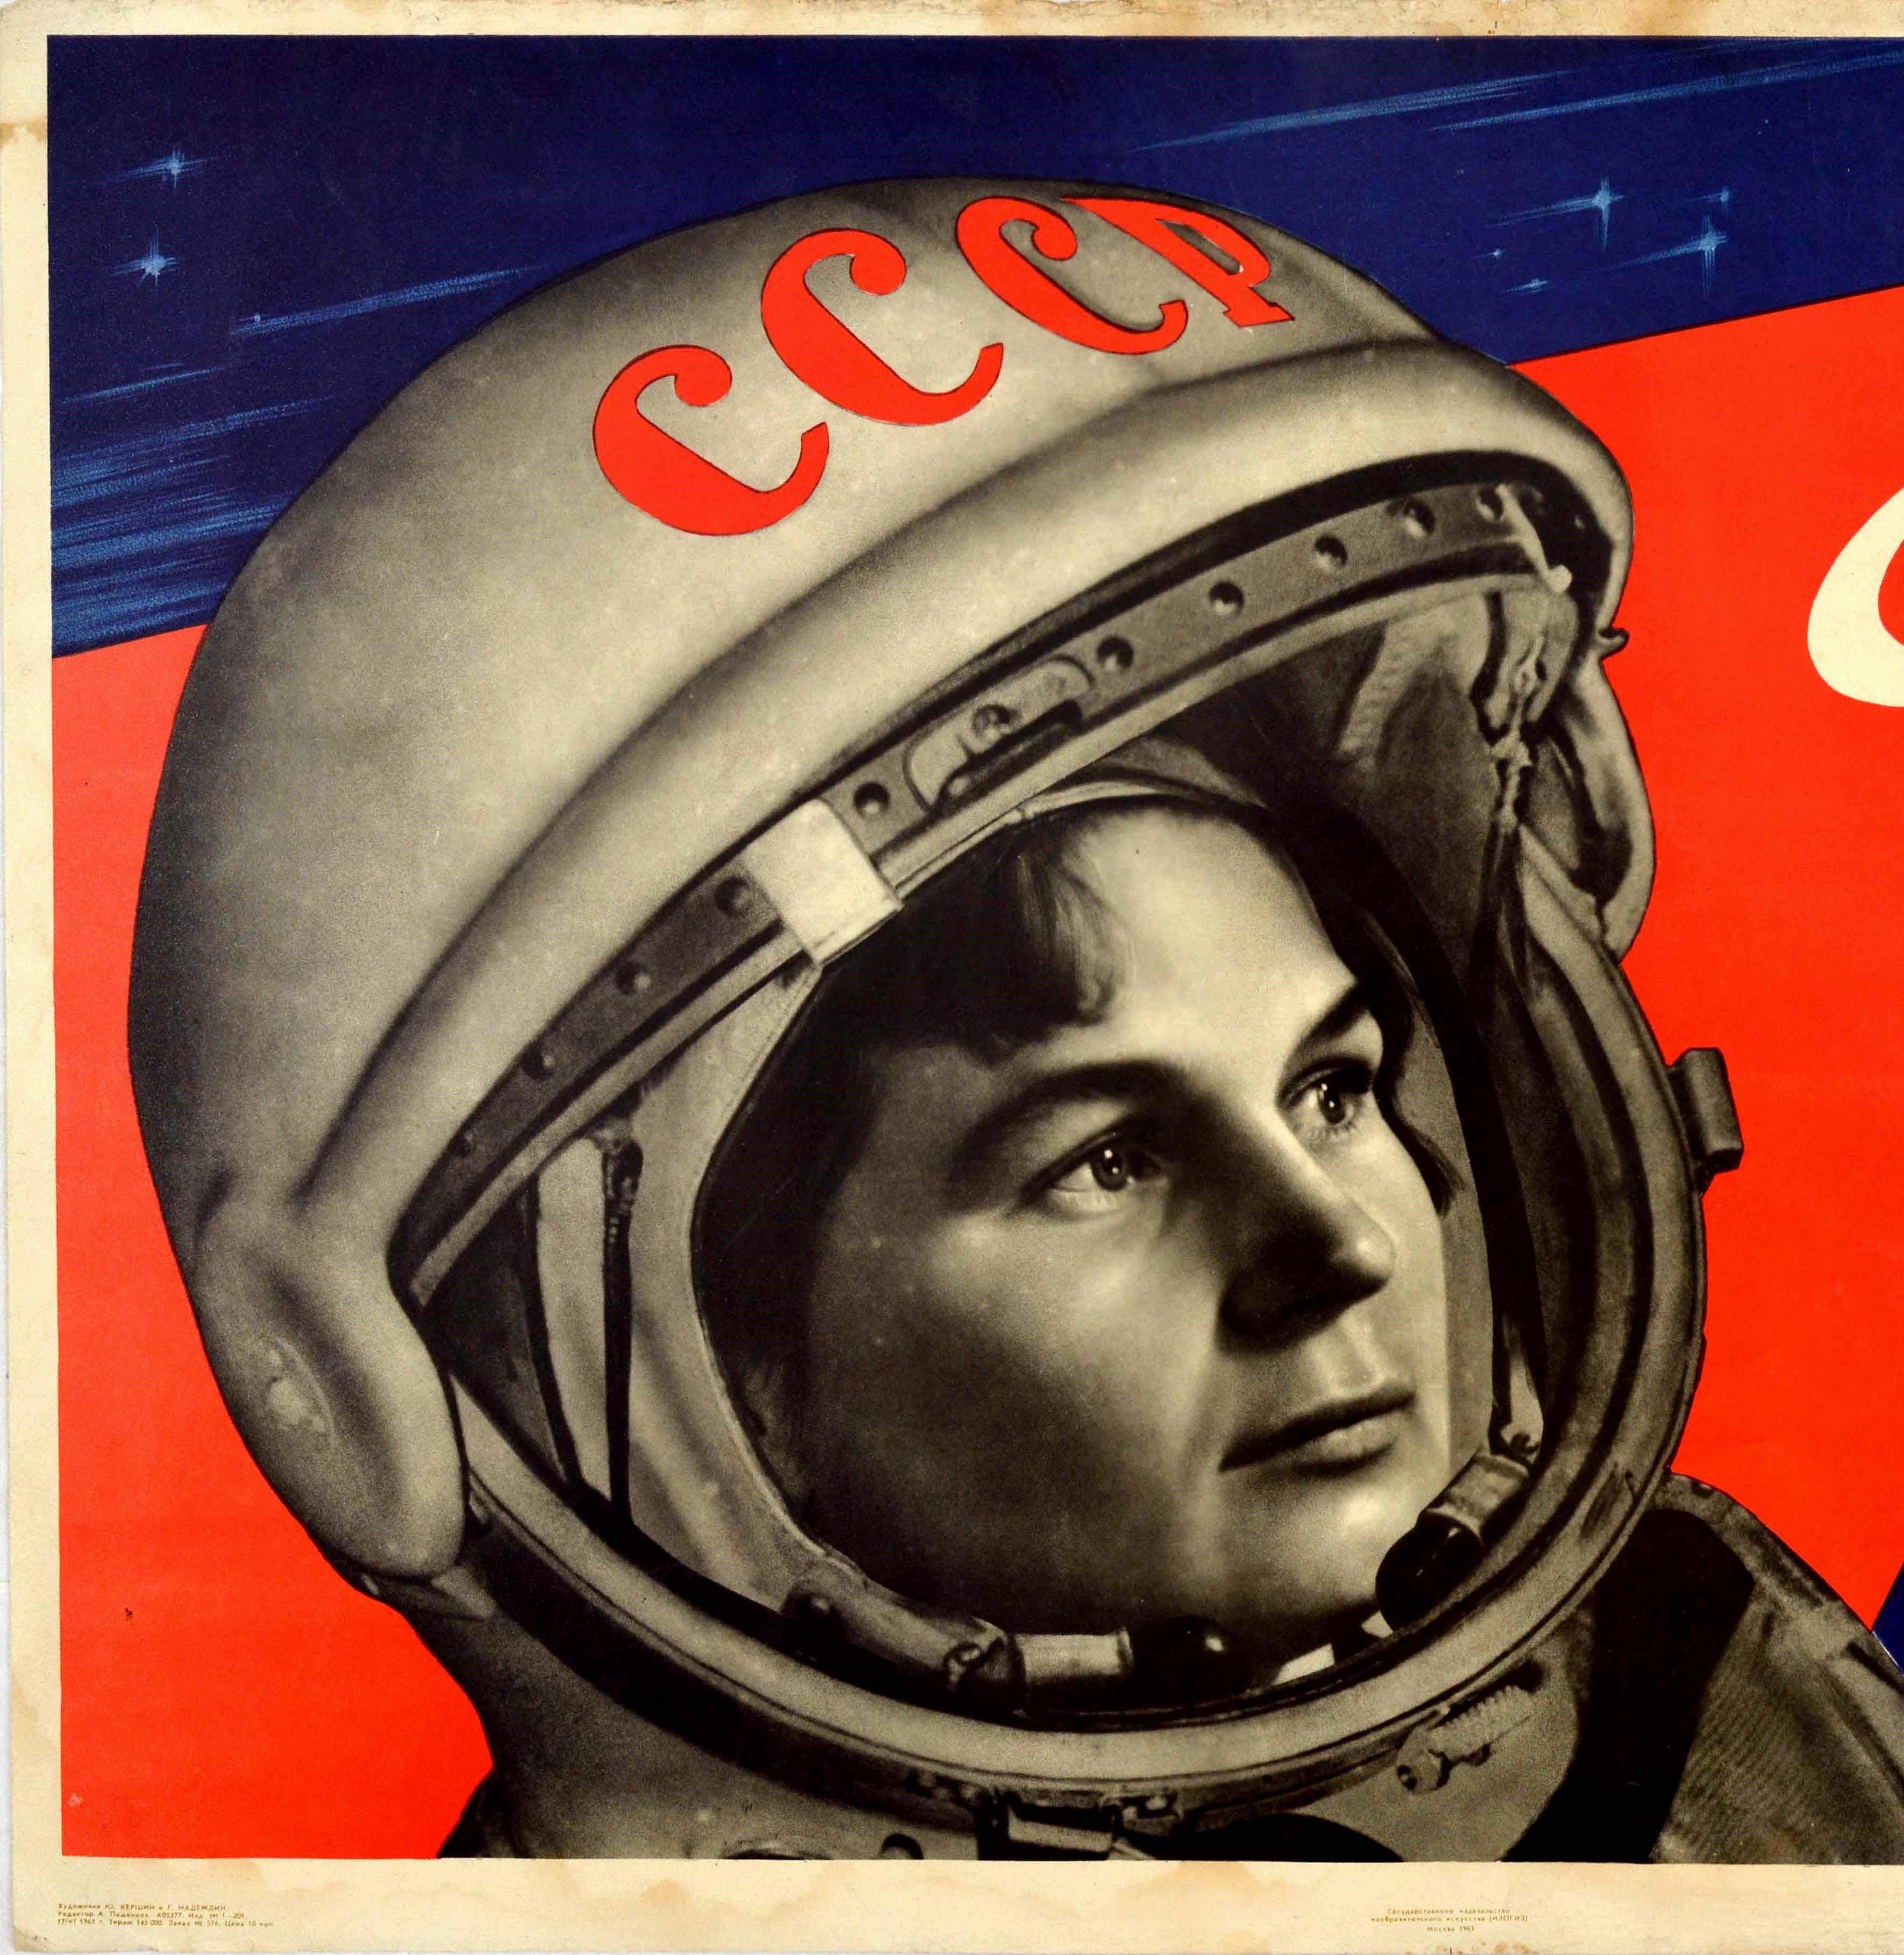 Original vintage Soviet propaganda poster - Glory to the First Woman Cosmonaut! - featuring a great design of a black and white photograph of the first woman in space Valentina Tereshkova (Valentina Vladimirovna Tereshkova; b 1937) in a CCCP / USSR